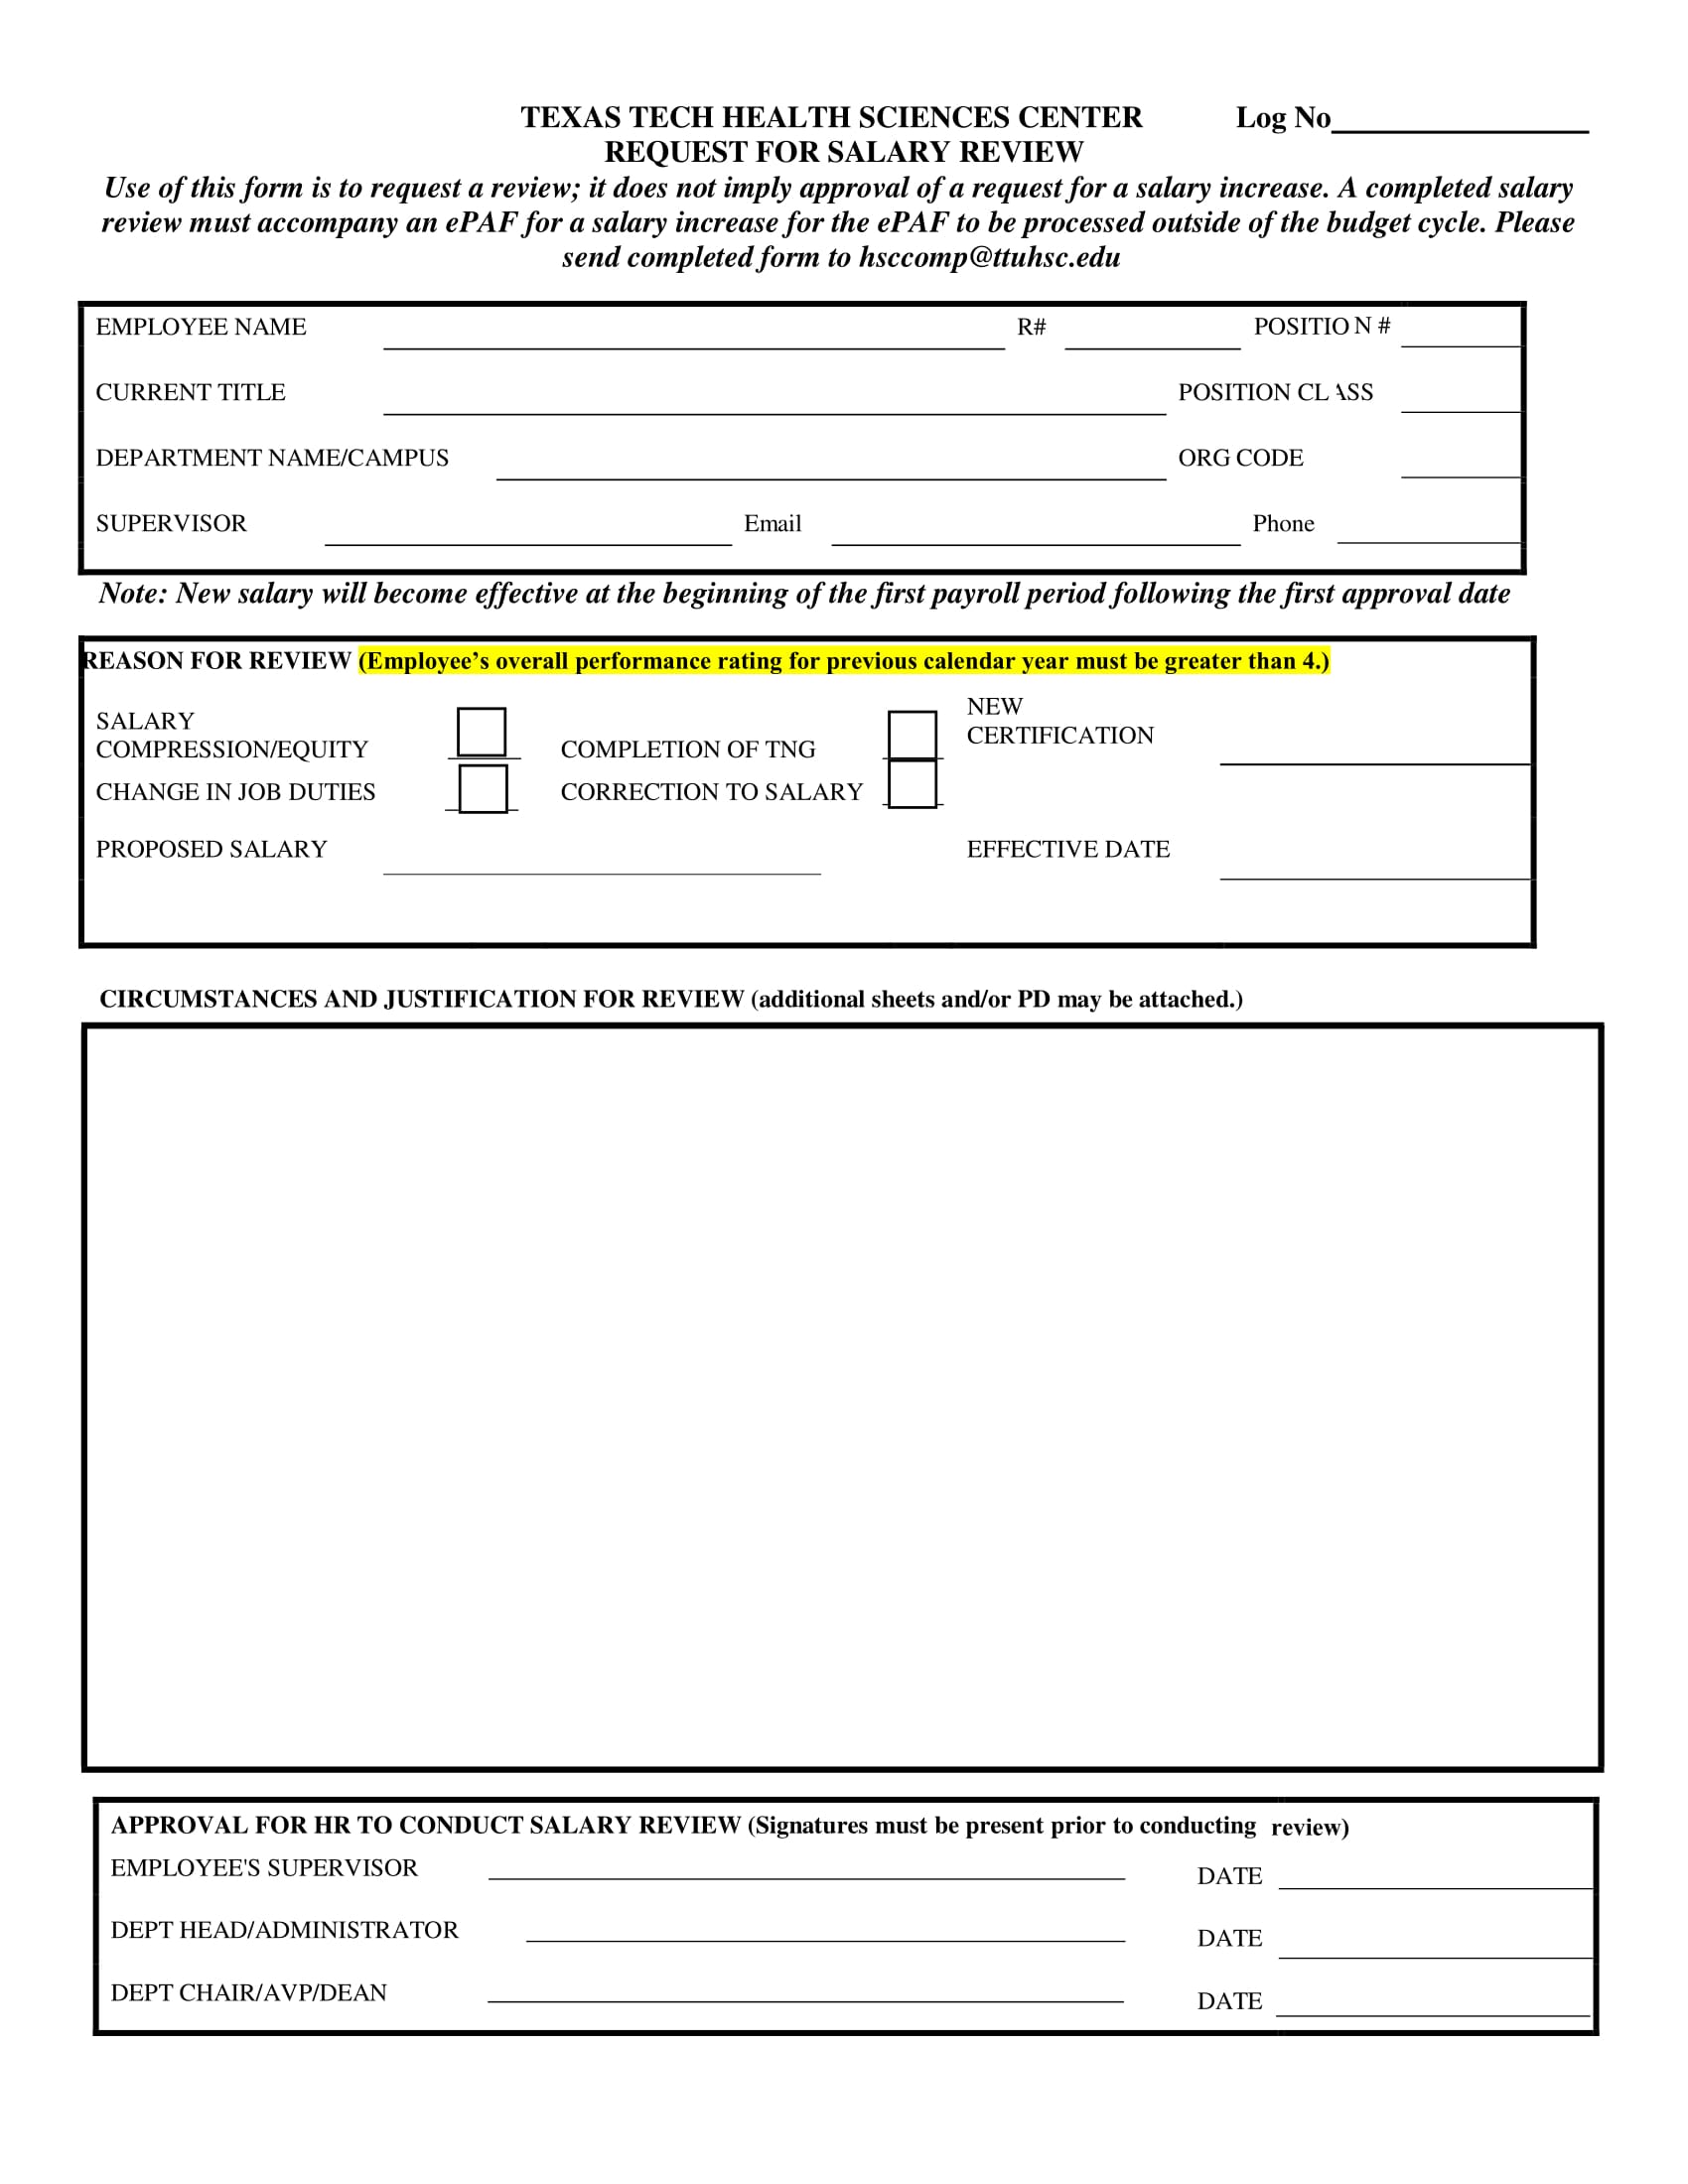 request for salary review form 1